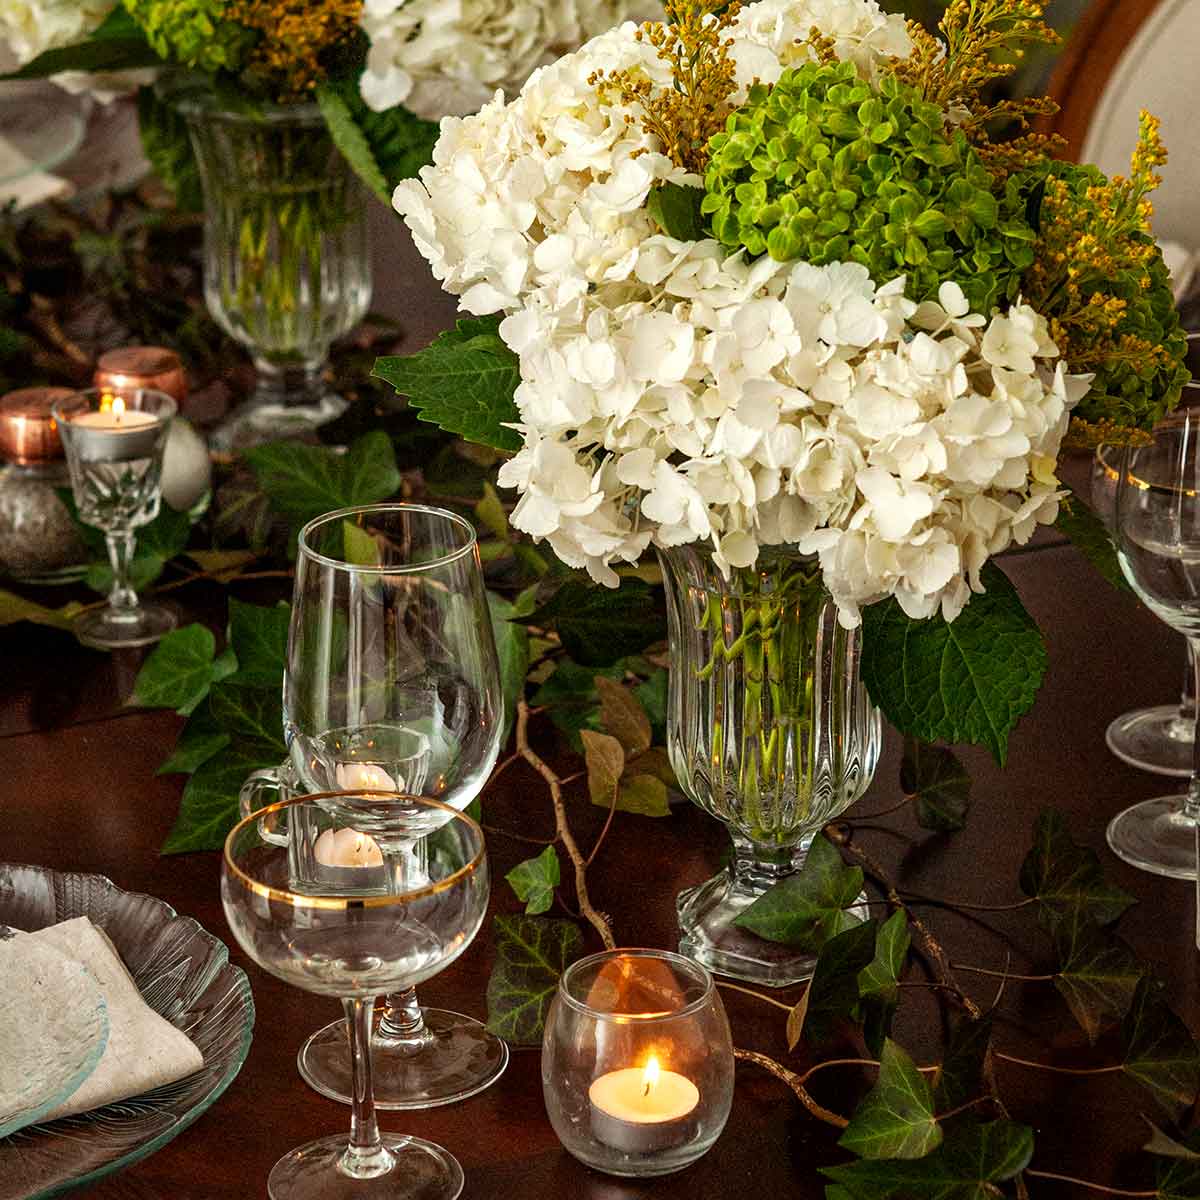 A table decorated with ivy, flowers, and small candles.